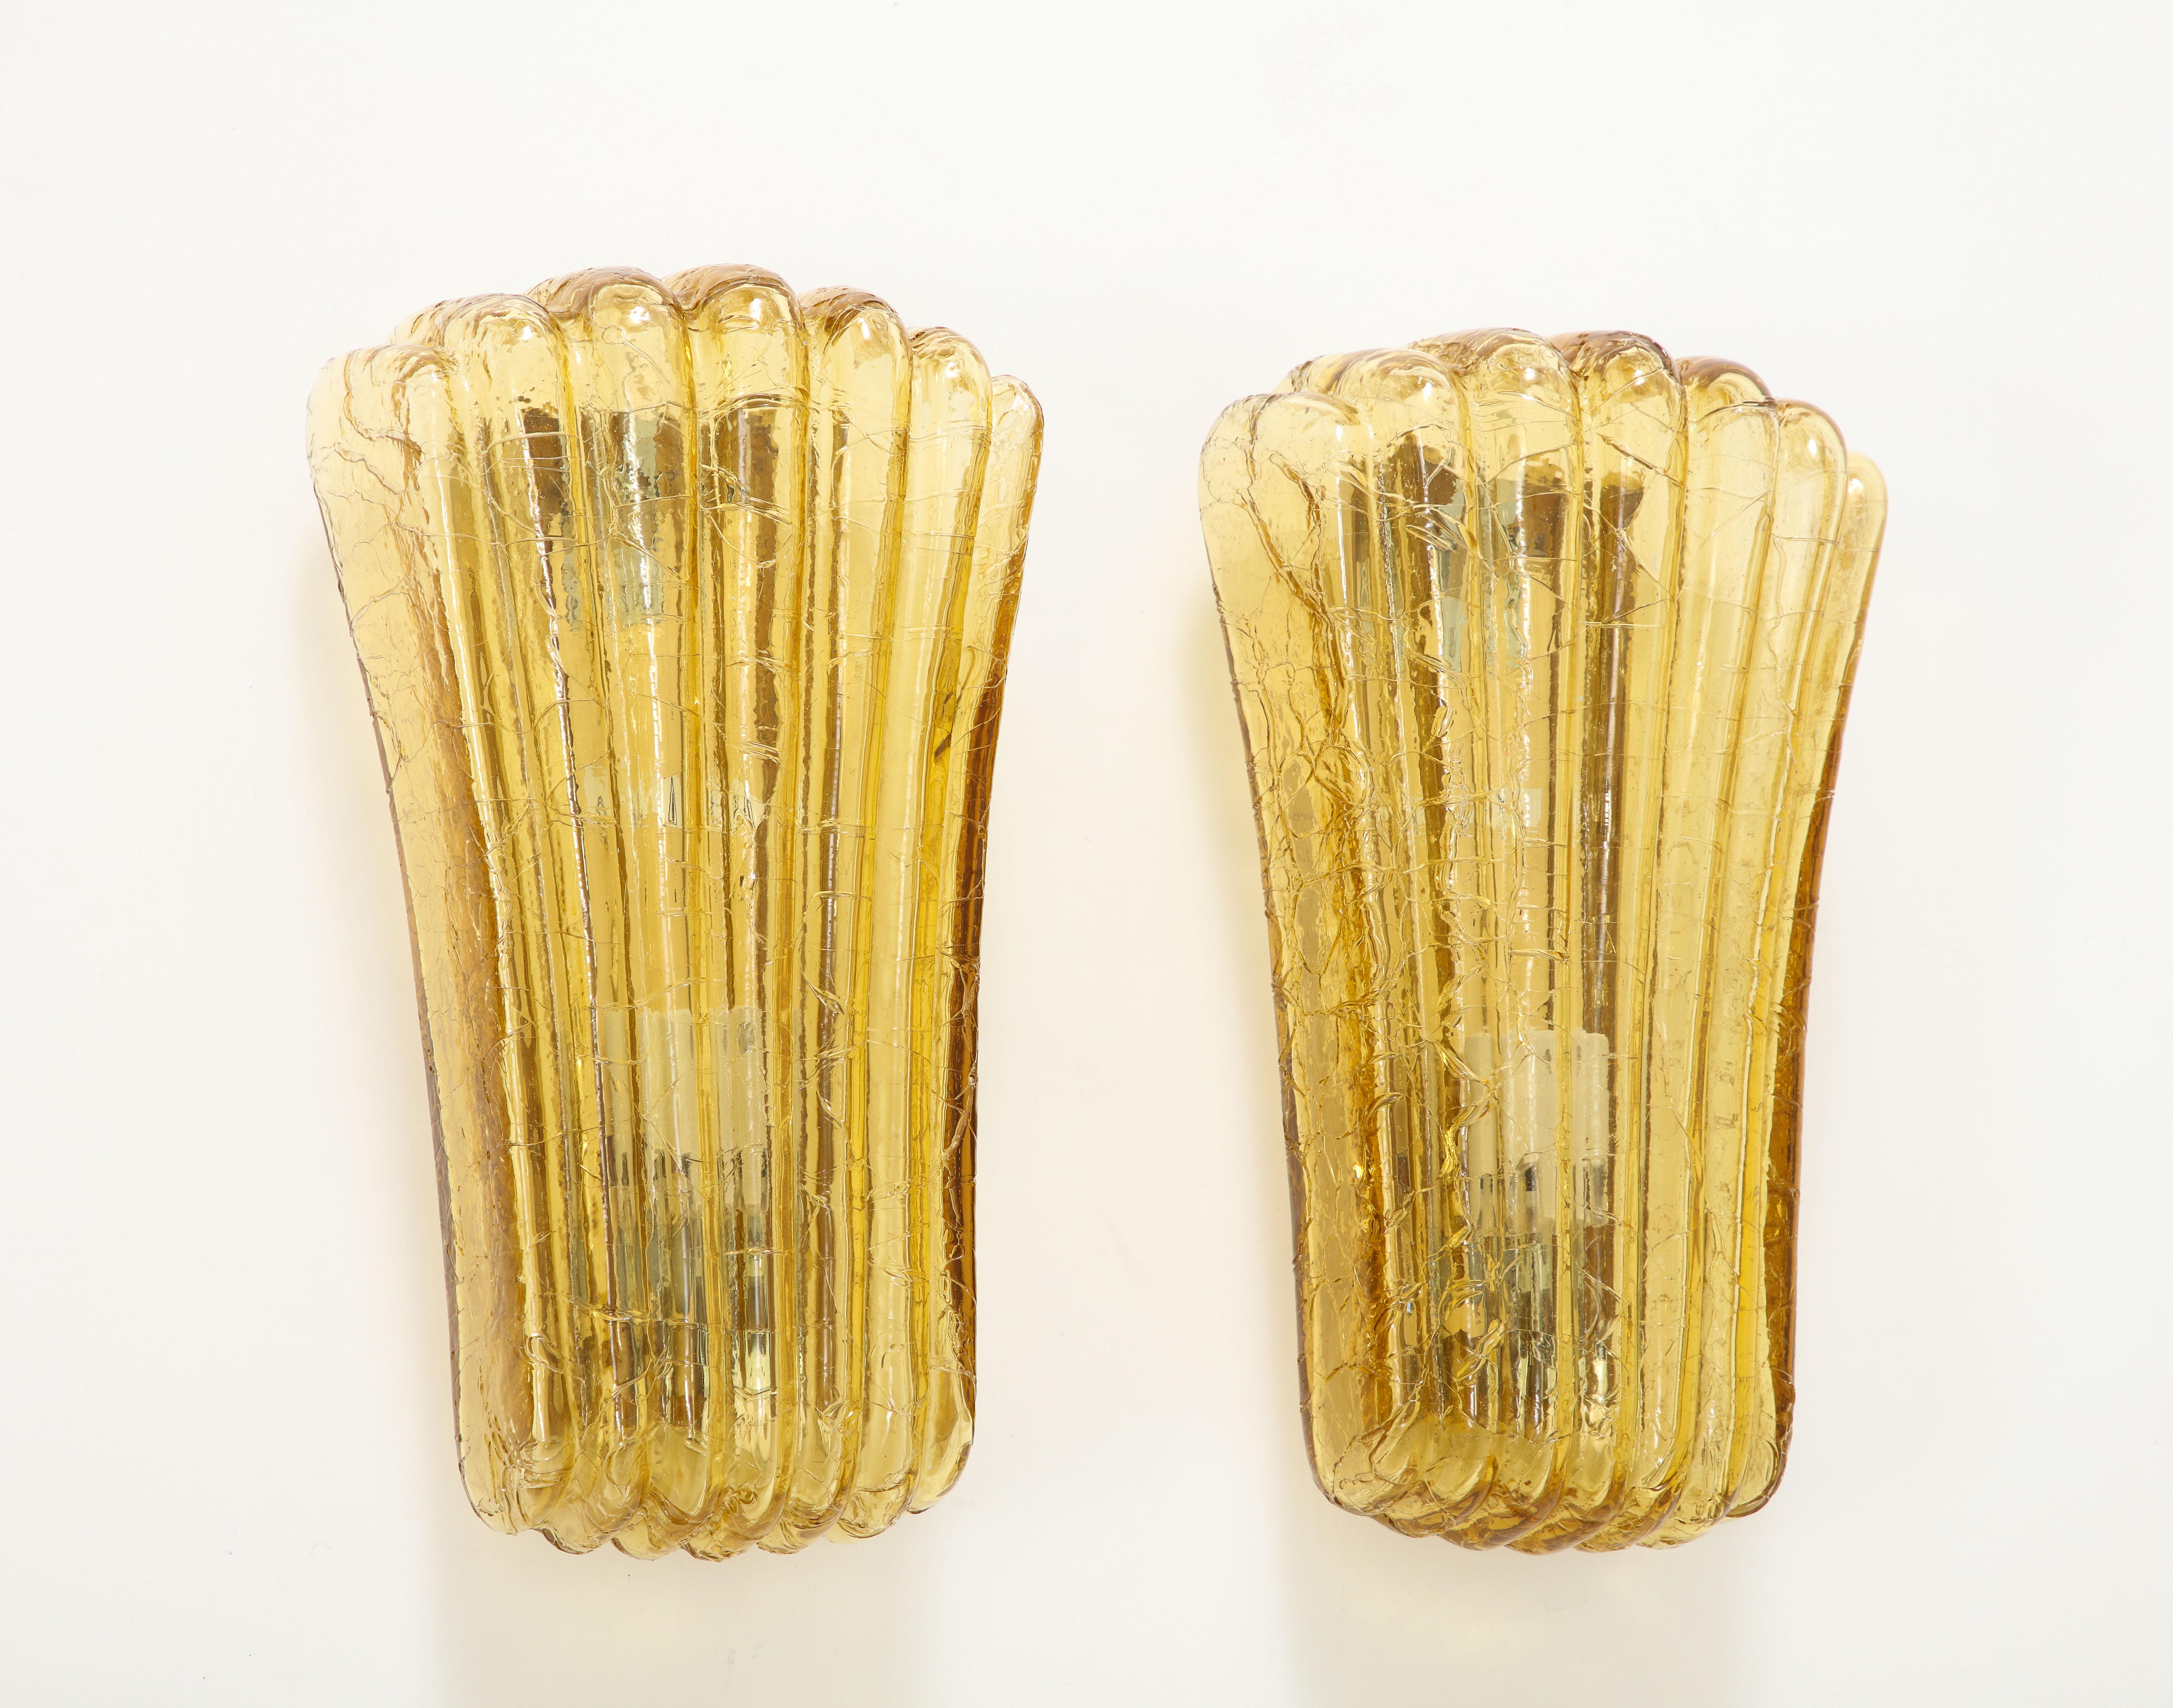 Modernist stylized amber glass shell sconces by Doria. Sconces have been rewired for use in the USA by an UL listed electrician. Currently 2 pairs are available, 3400 Per pair 